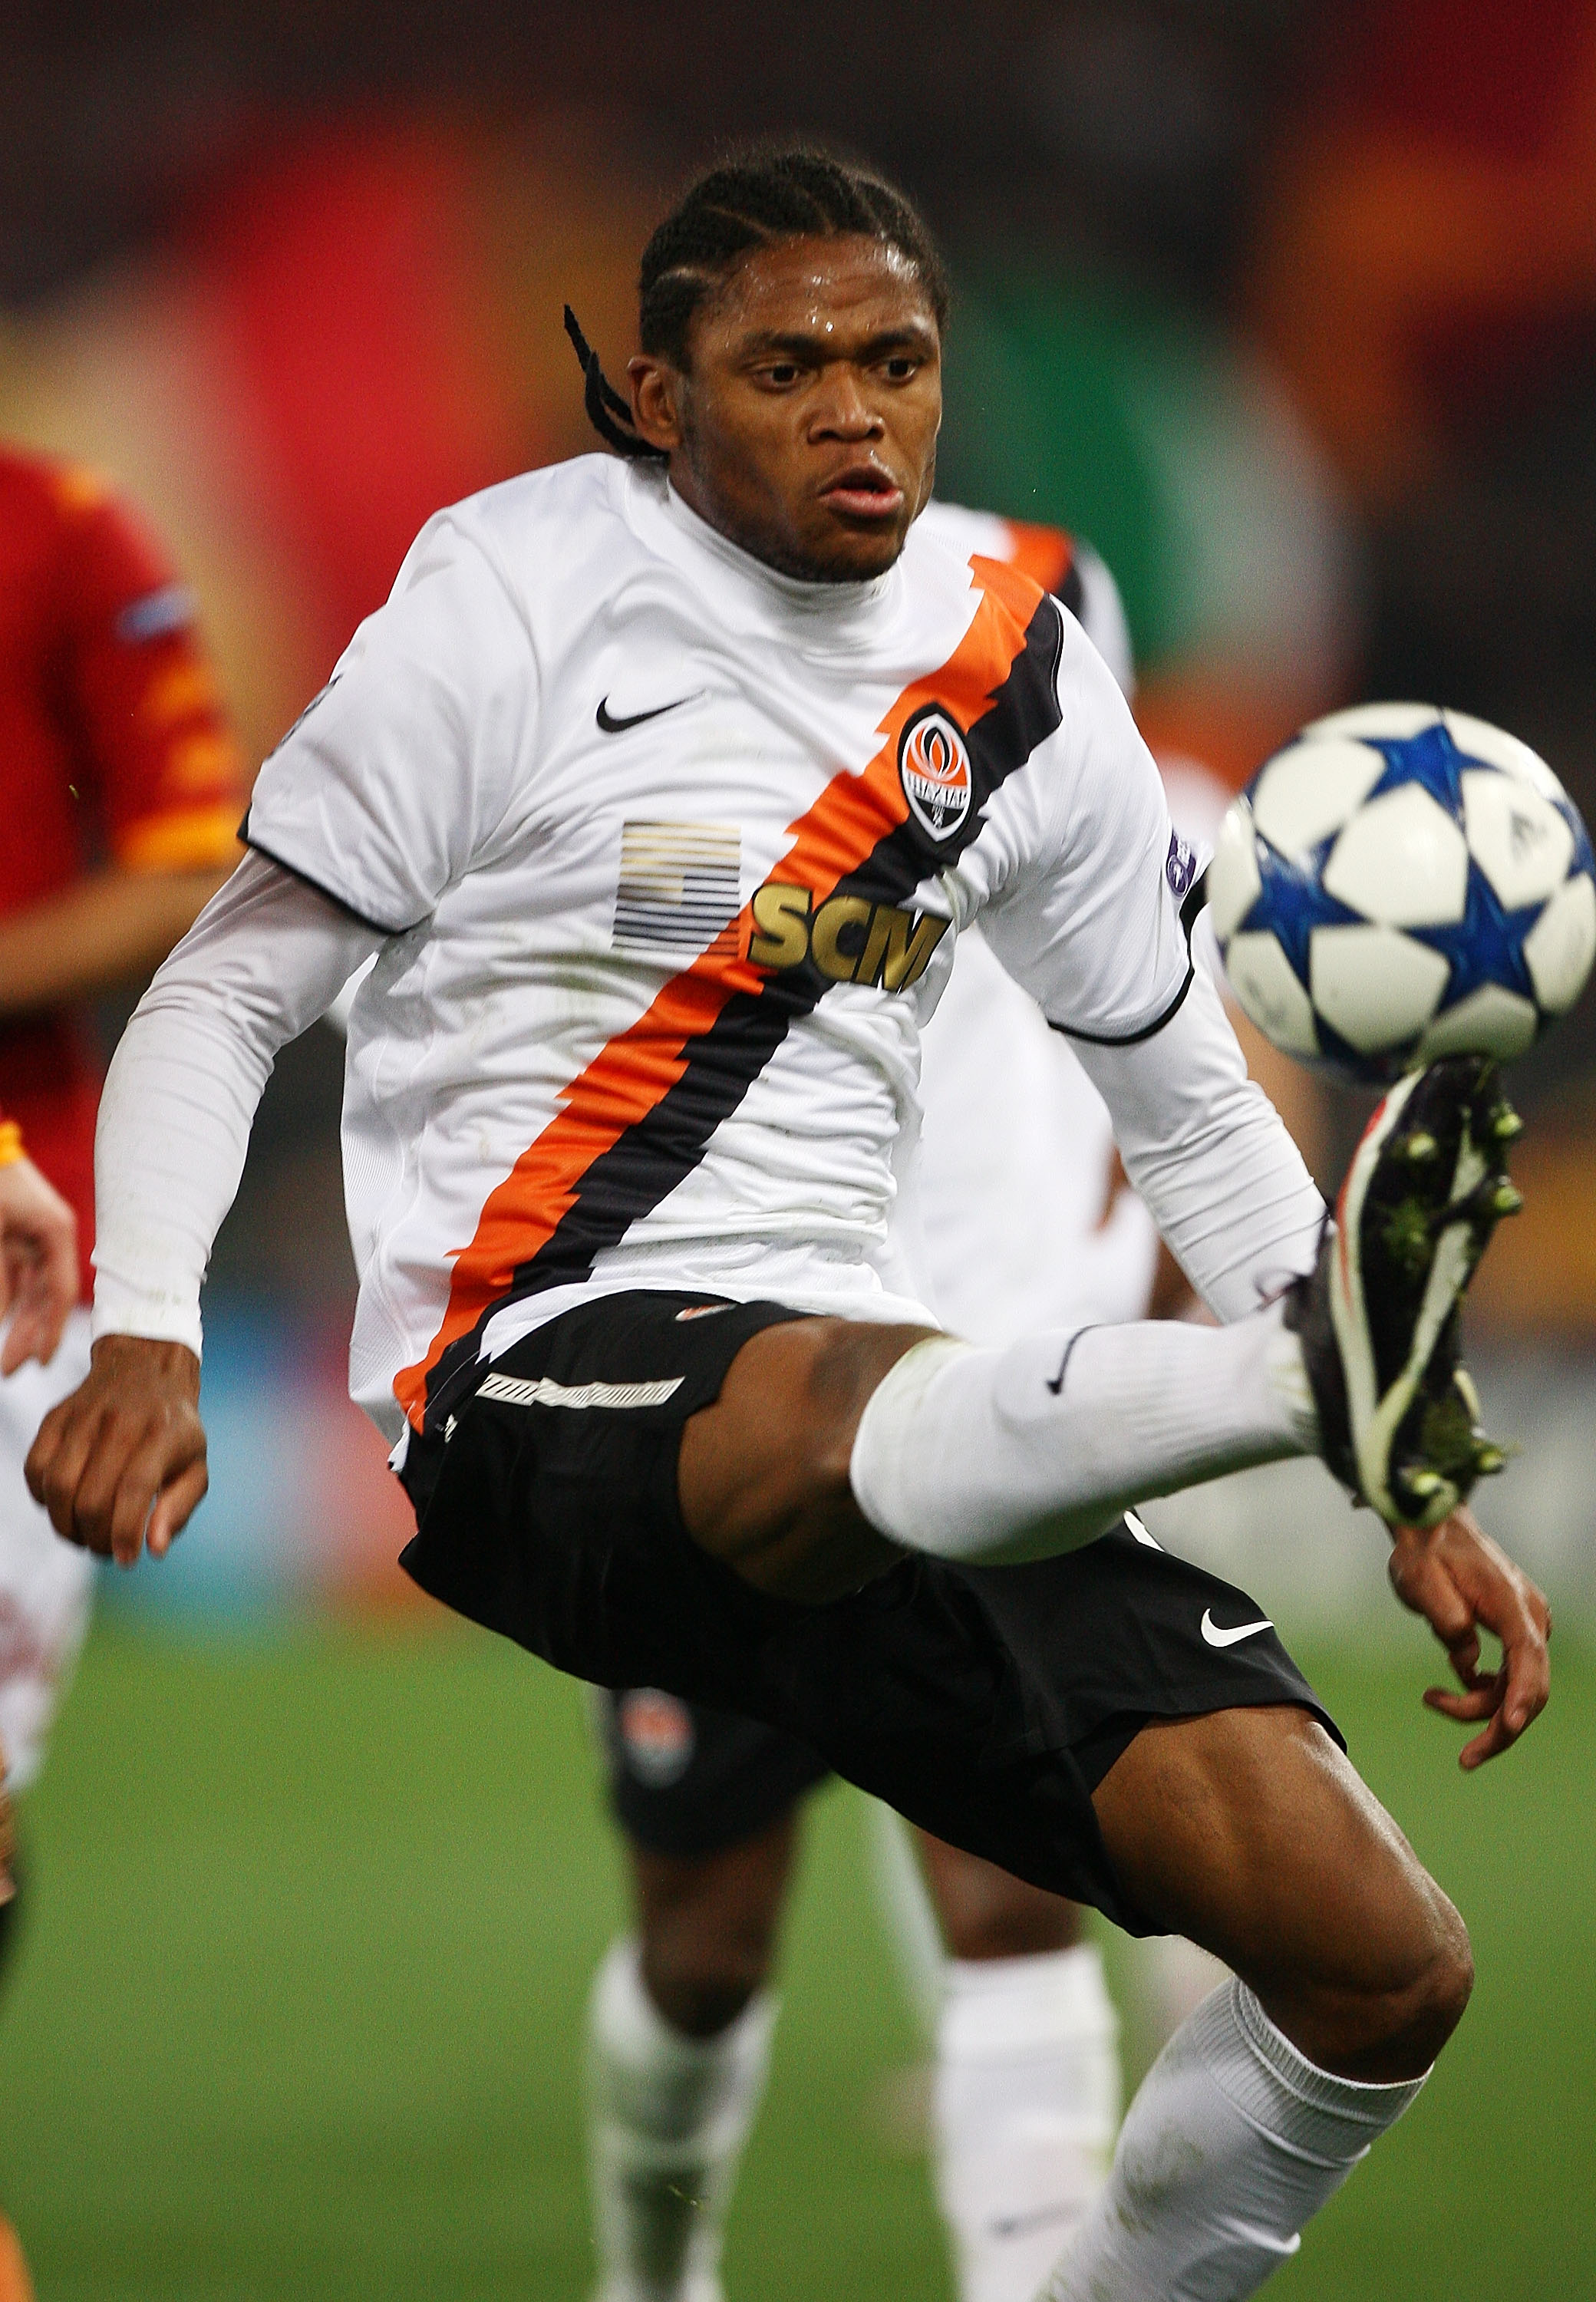 ROME, ITALY - FEBRUARY 16:  Douglas Costa of Shakhtar Donetsk in action during the UEFA Champions League round of 16 first leg match between AS Roma and Shakhtar Donetsk at Stadio Olimpico on February 16, 2011 in Rome, Italy.  (Photo by Paolo Bruno/Getty